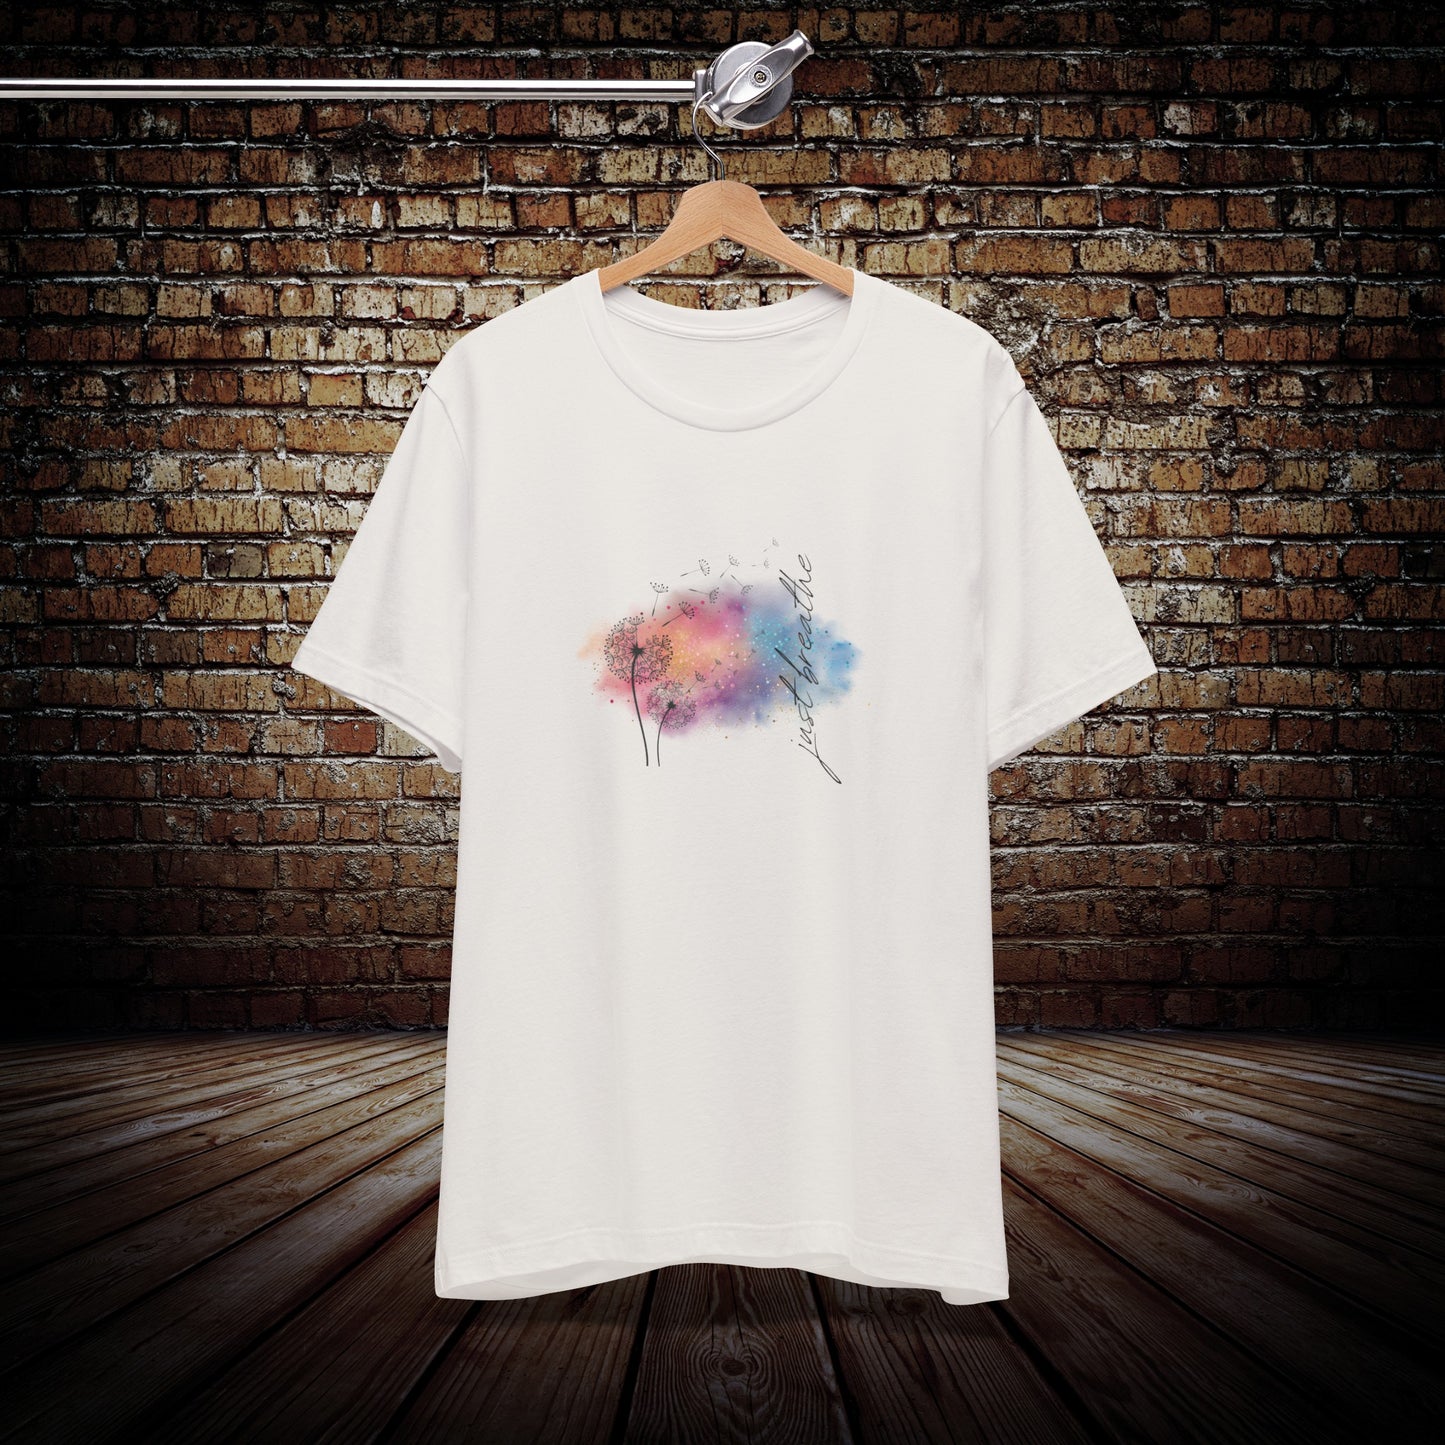 Just Breathe in color - Yoga Inspired T-Shirt